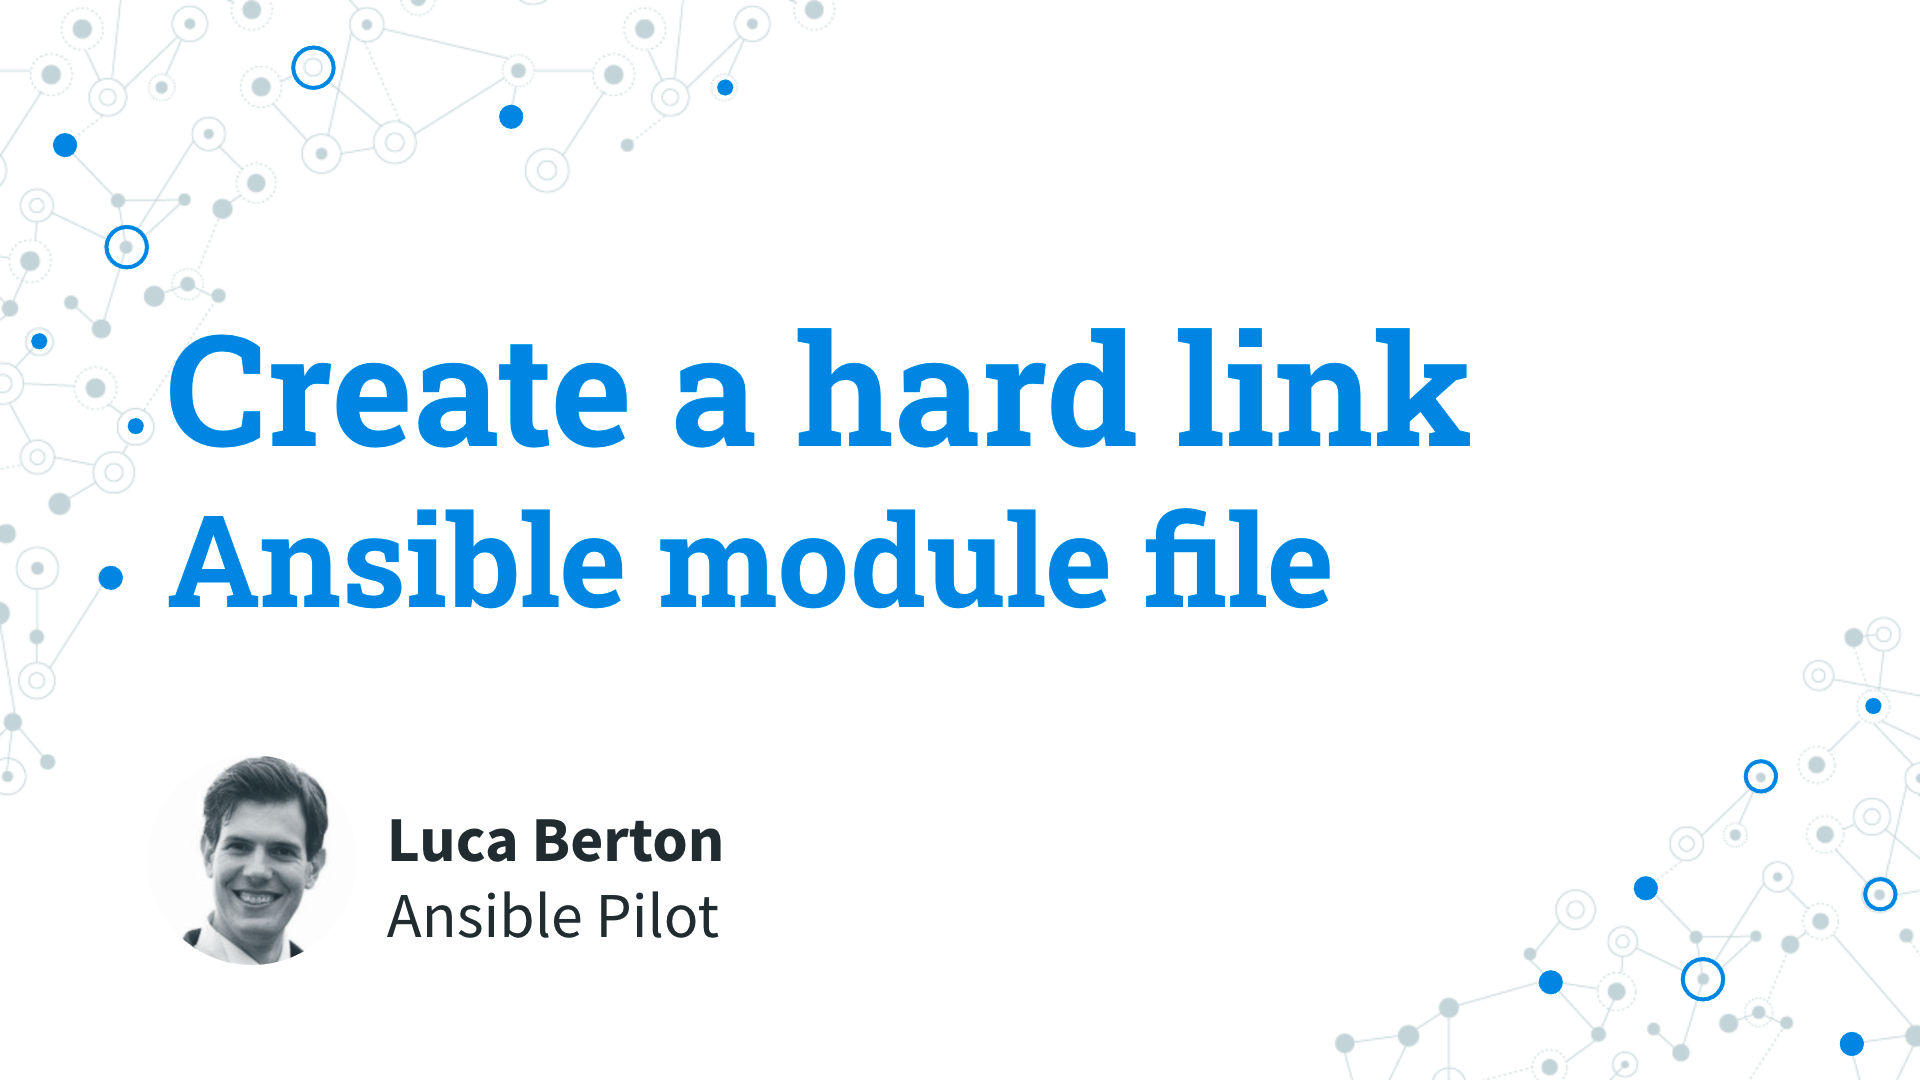 Create a hard link in Linux - Ansible module file